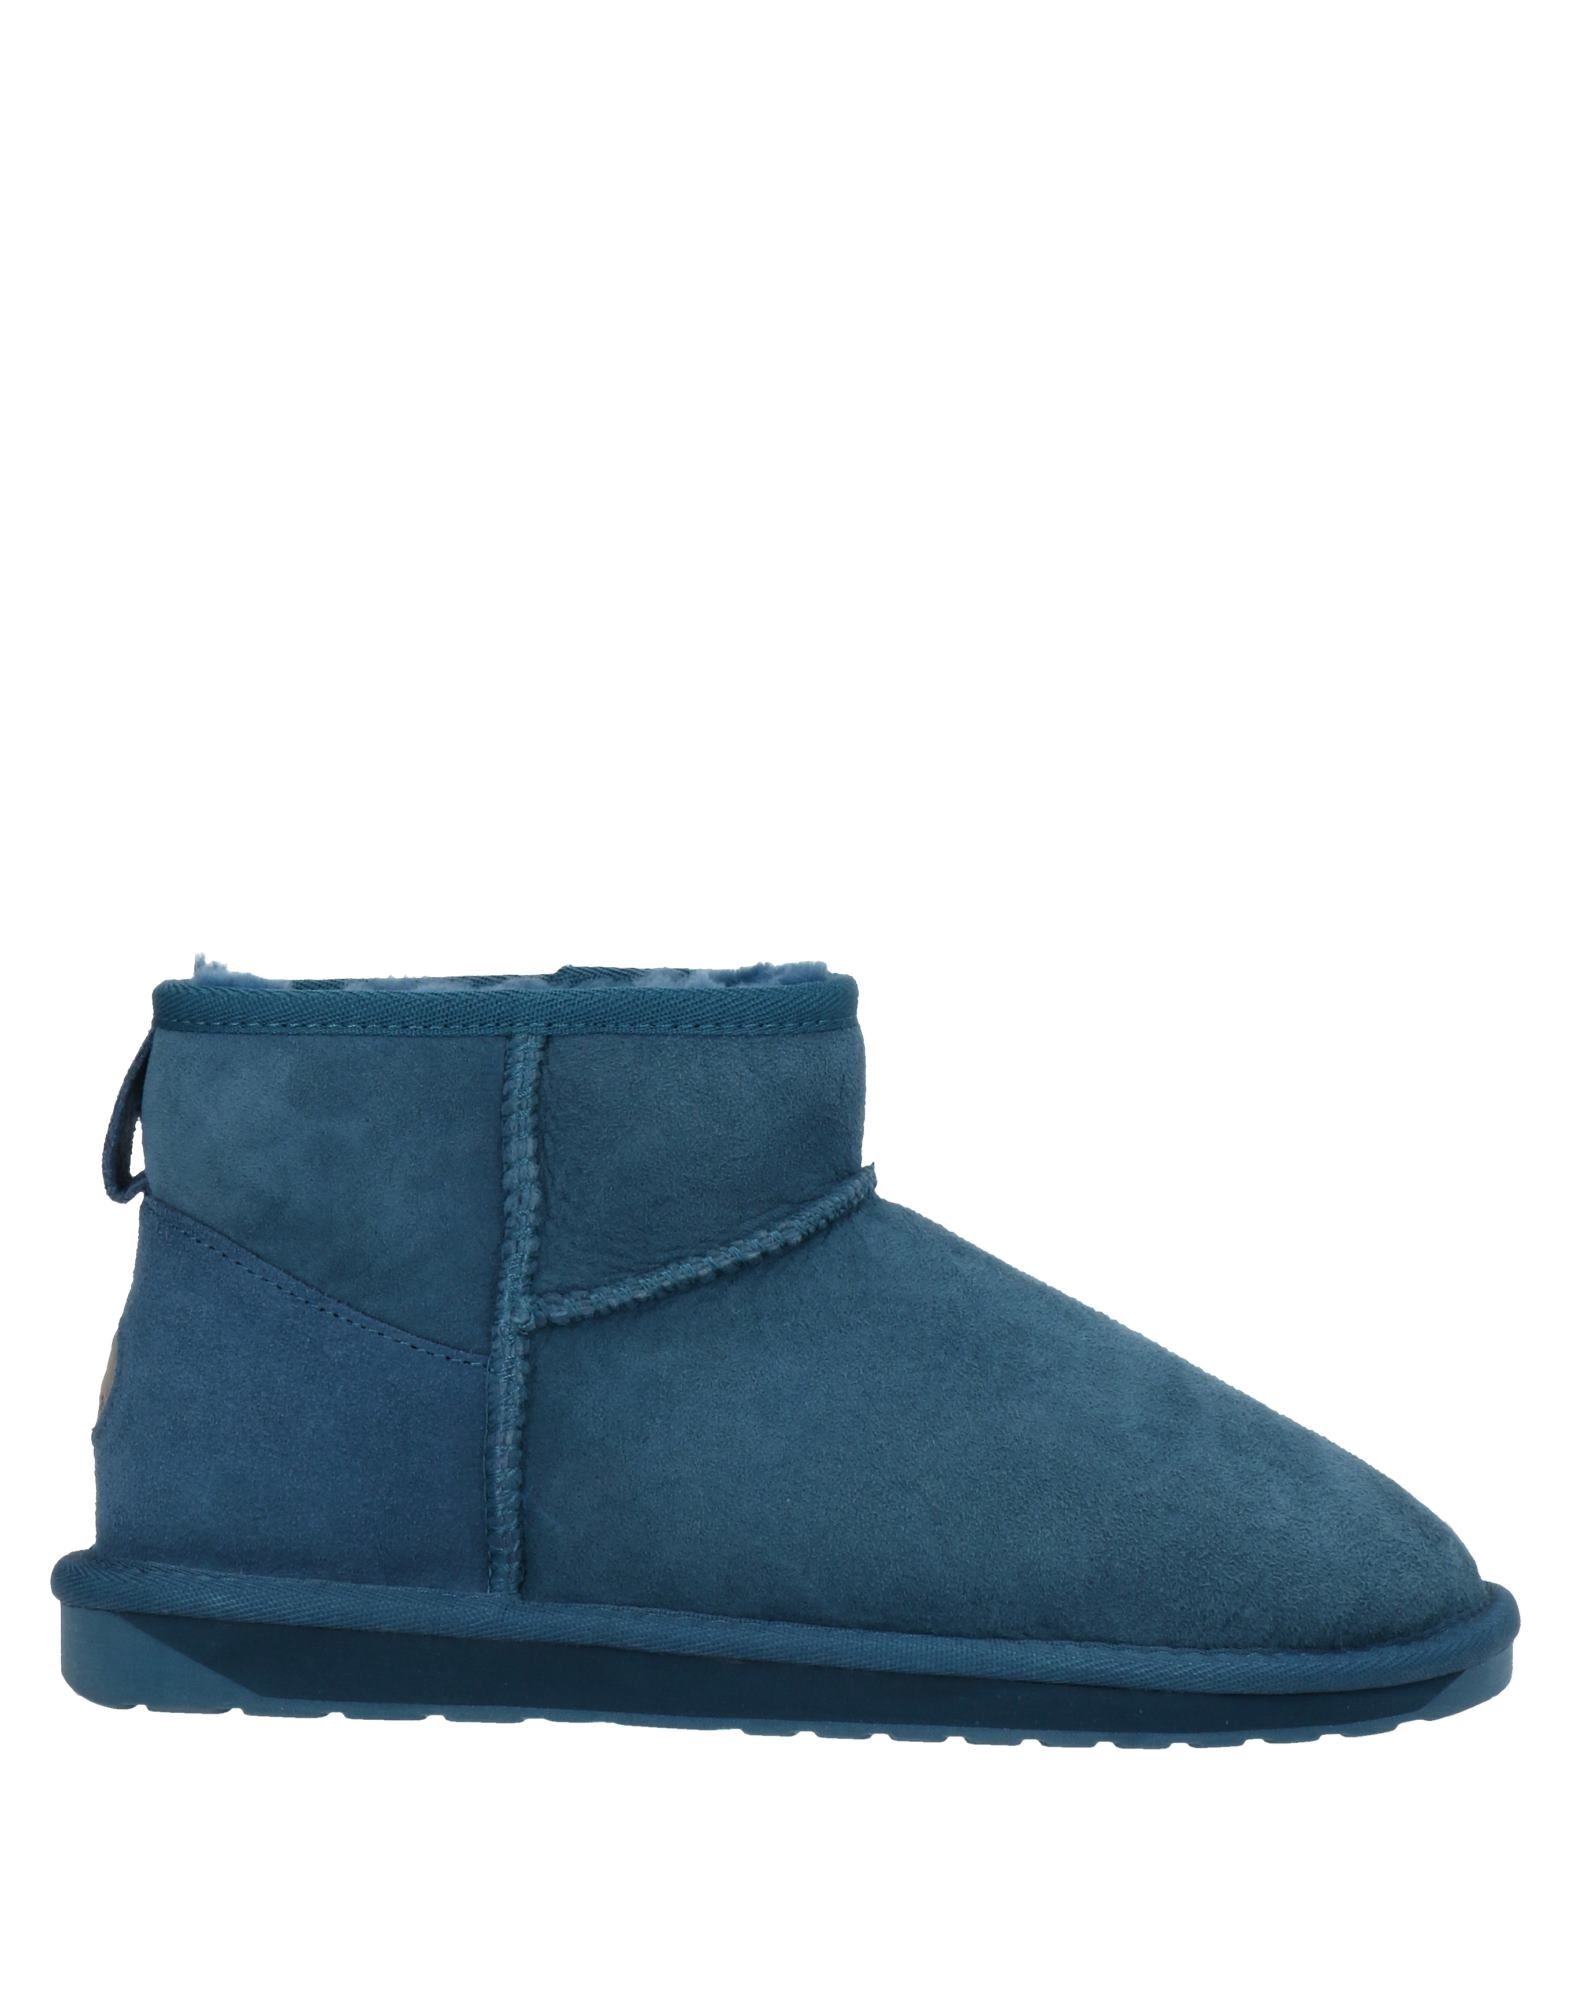 Emu Ankle Boots In Turquoise